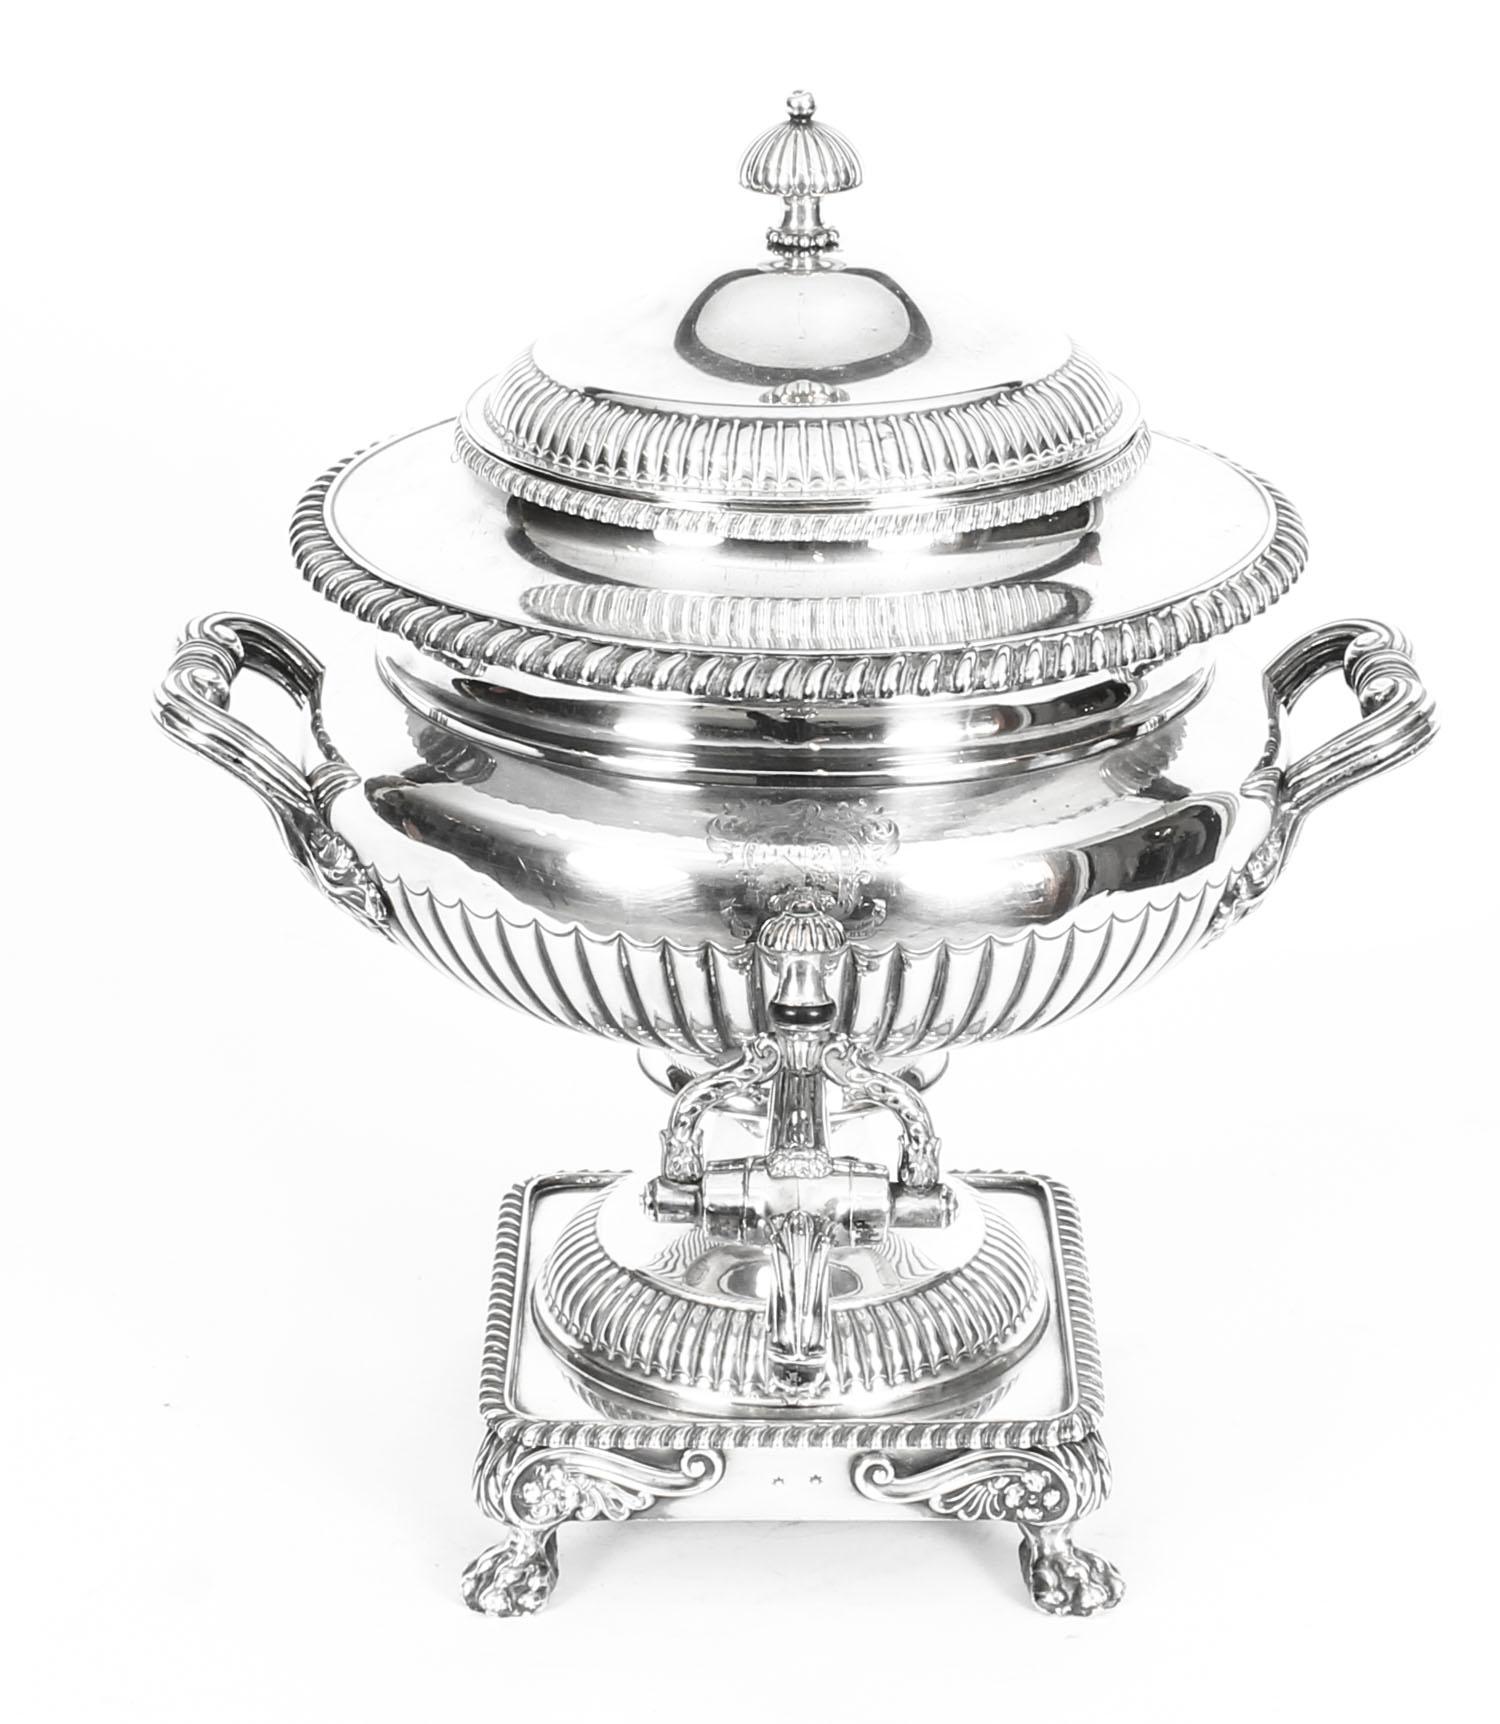 This is a wonderful antique Regency Old Sheffield silver plated tea urn, circa 1820 in date.

This handsome antique Old Sheffield silver plated samovar has a reeded finial, foliate handles and tap finial. Typical decoration of the period with half